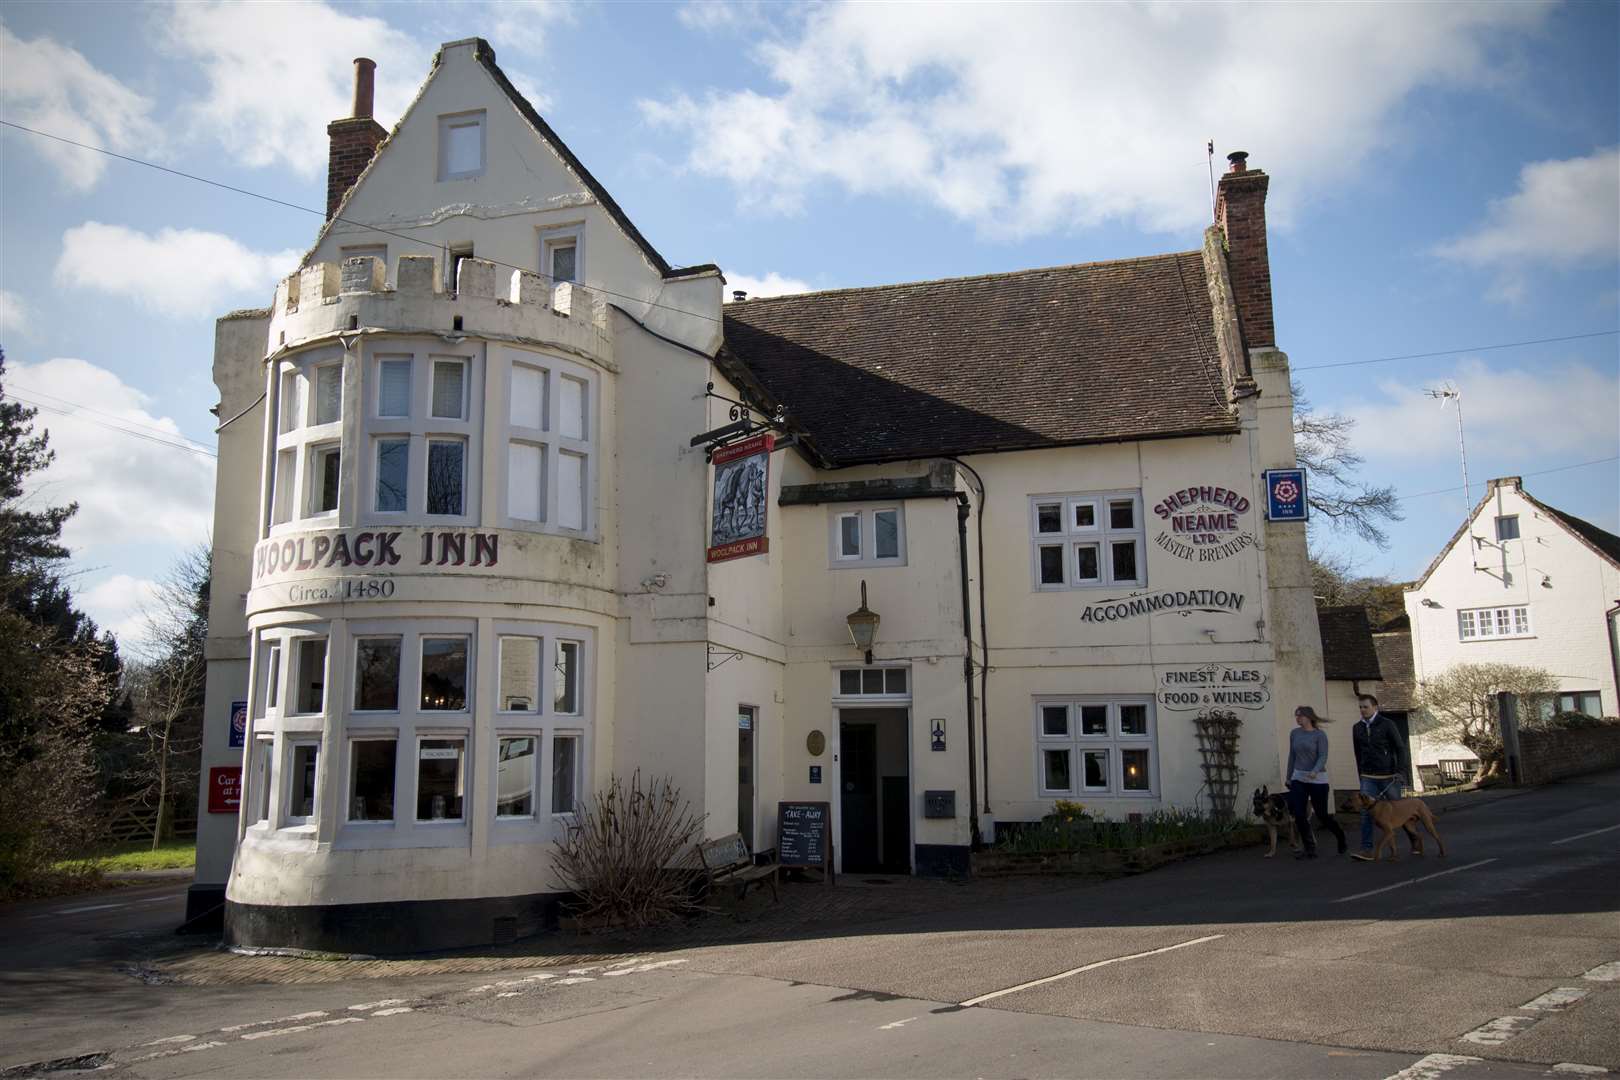 The 600-year-old Woolpack Inn can be found in the shadow of the Norman castle at Chilham